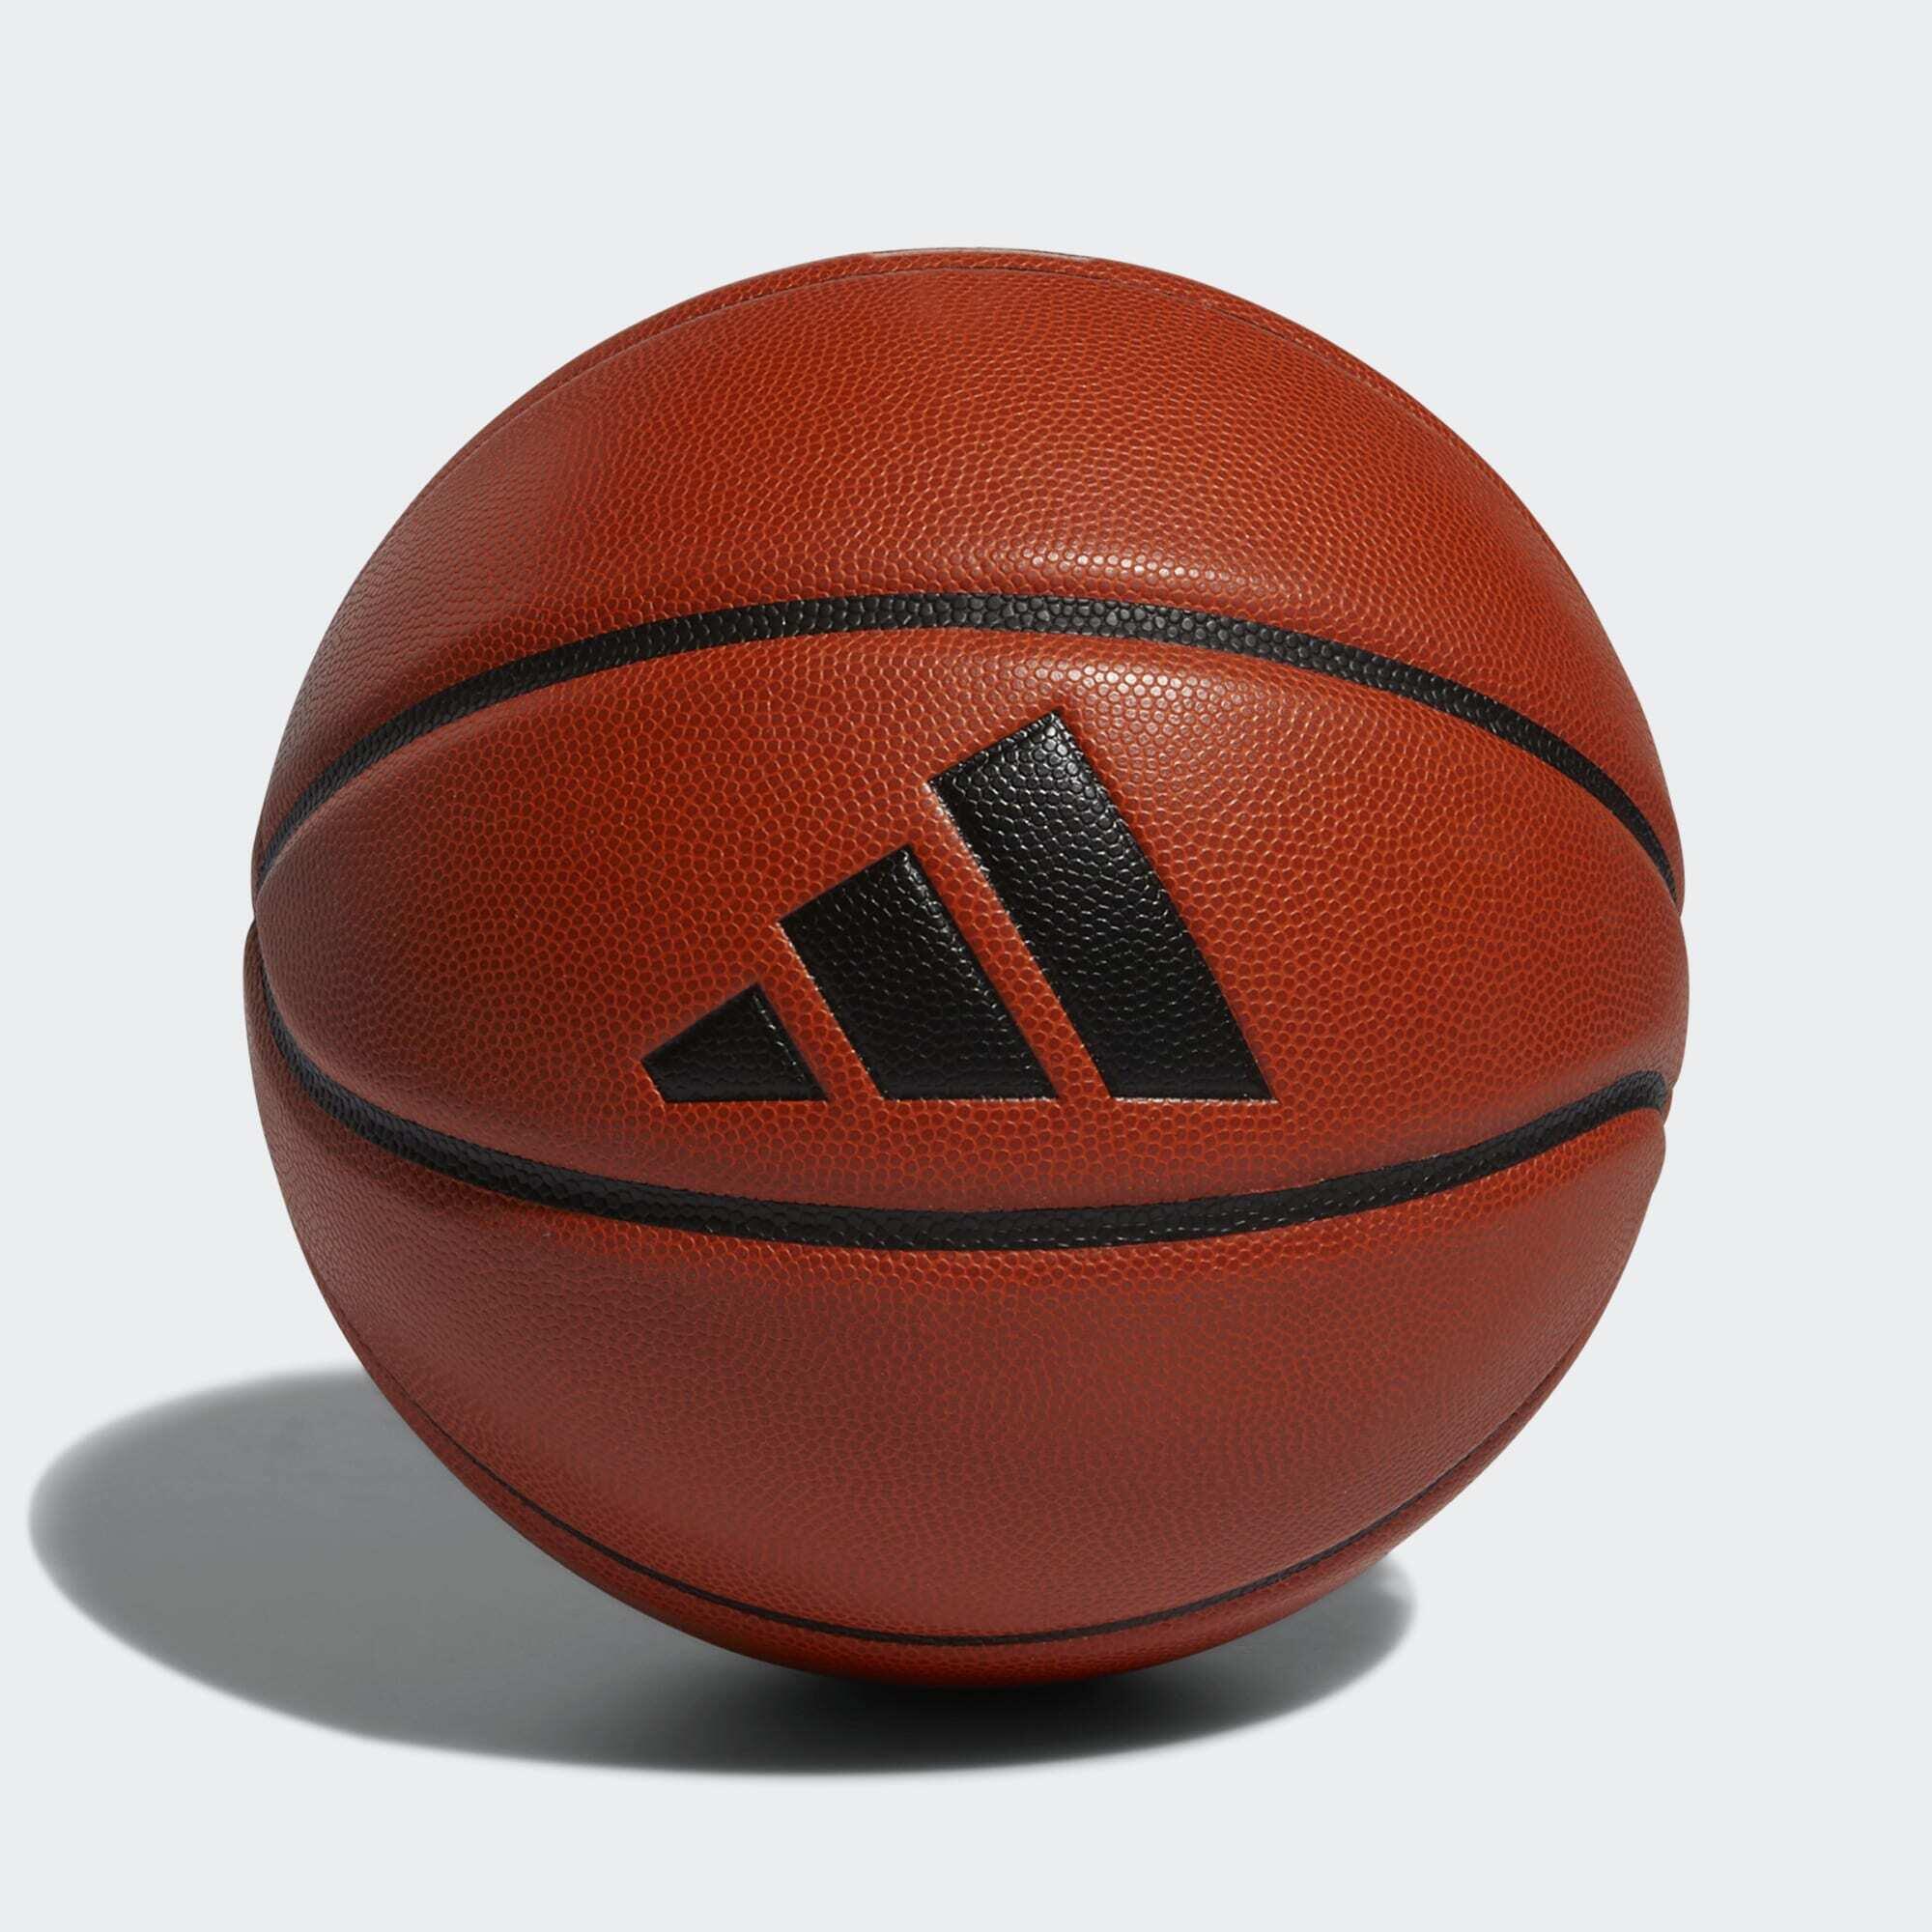 Pro 3.0 Official Game Ball 3/6